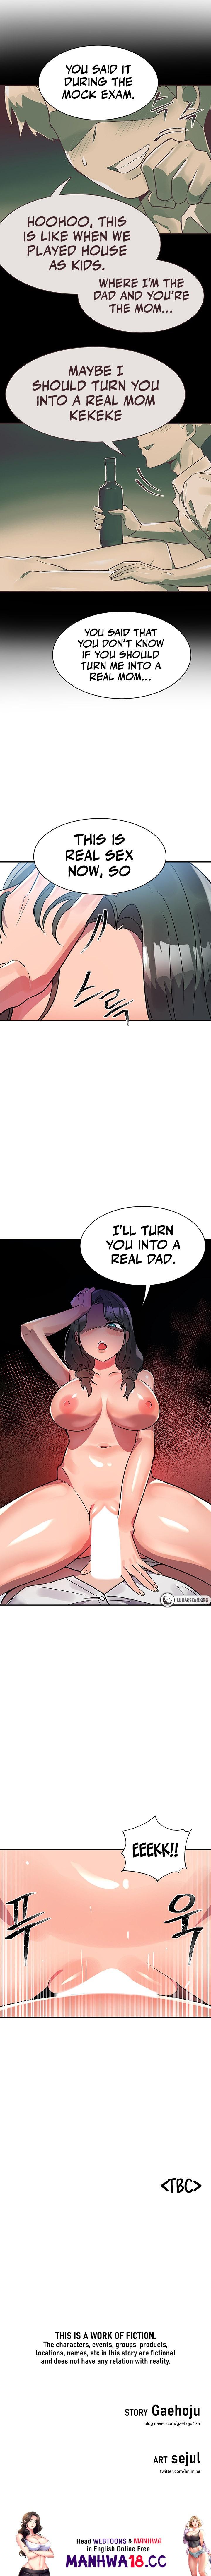 Relationship Reverse Button: Let’s Educate That Arrogant Girl - Chapter 8 Page 17